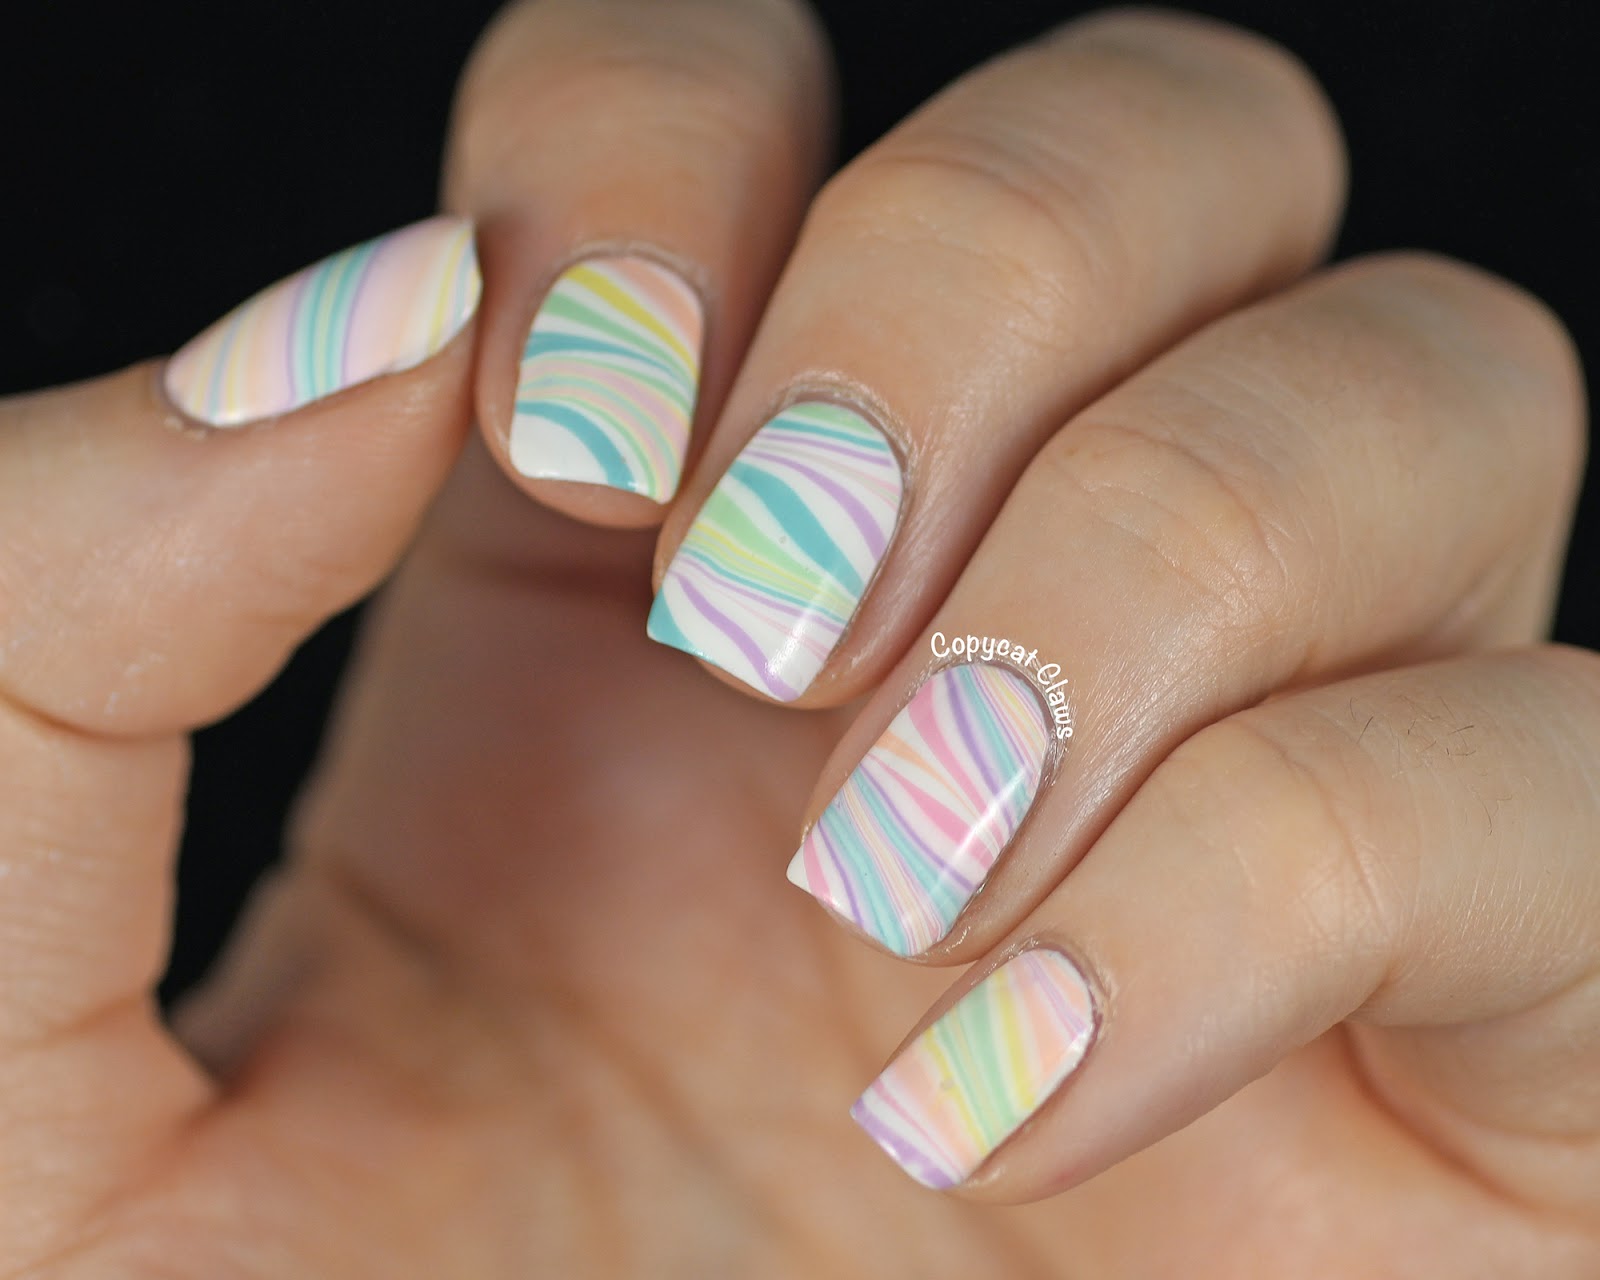 3. Short Nail Water Marble Tutorial - wide 9